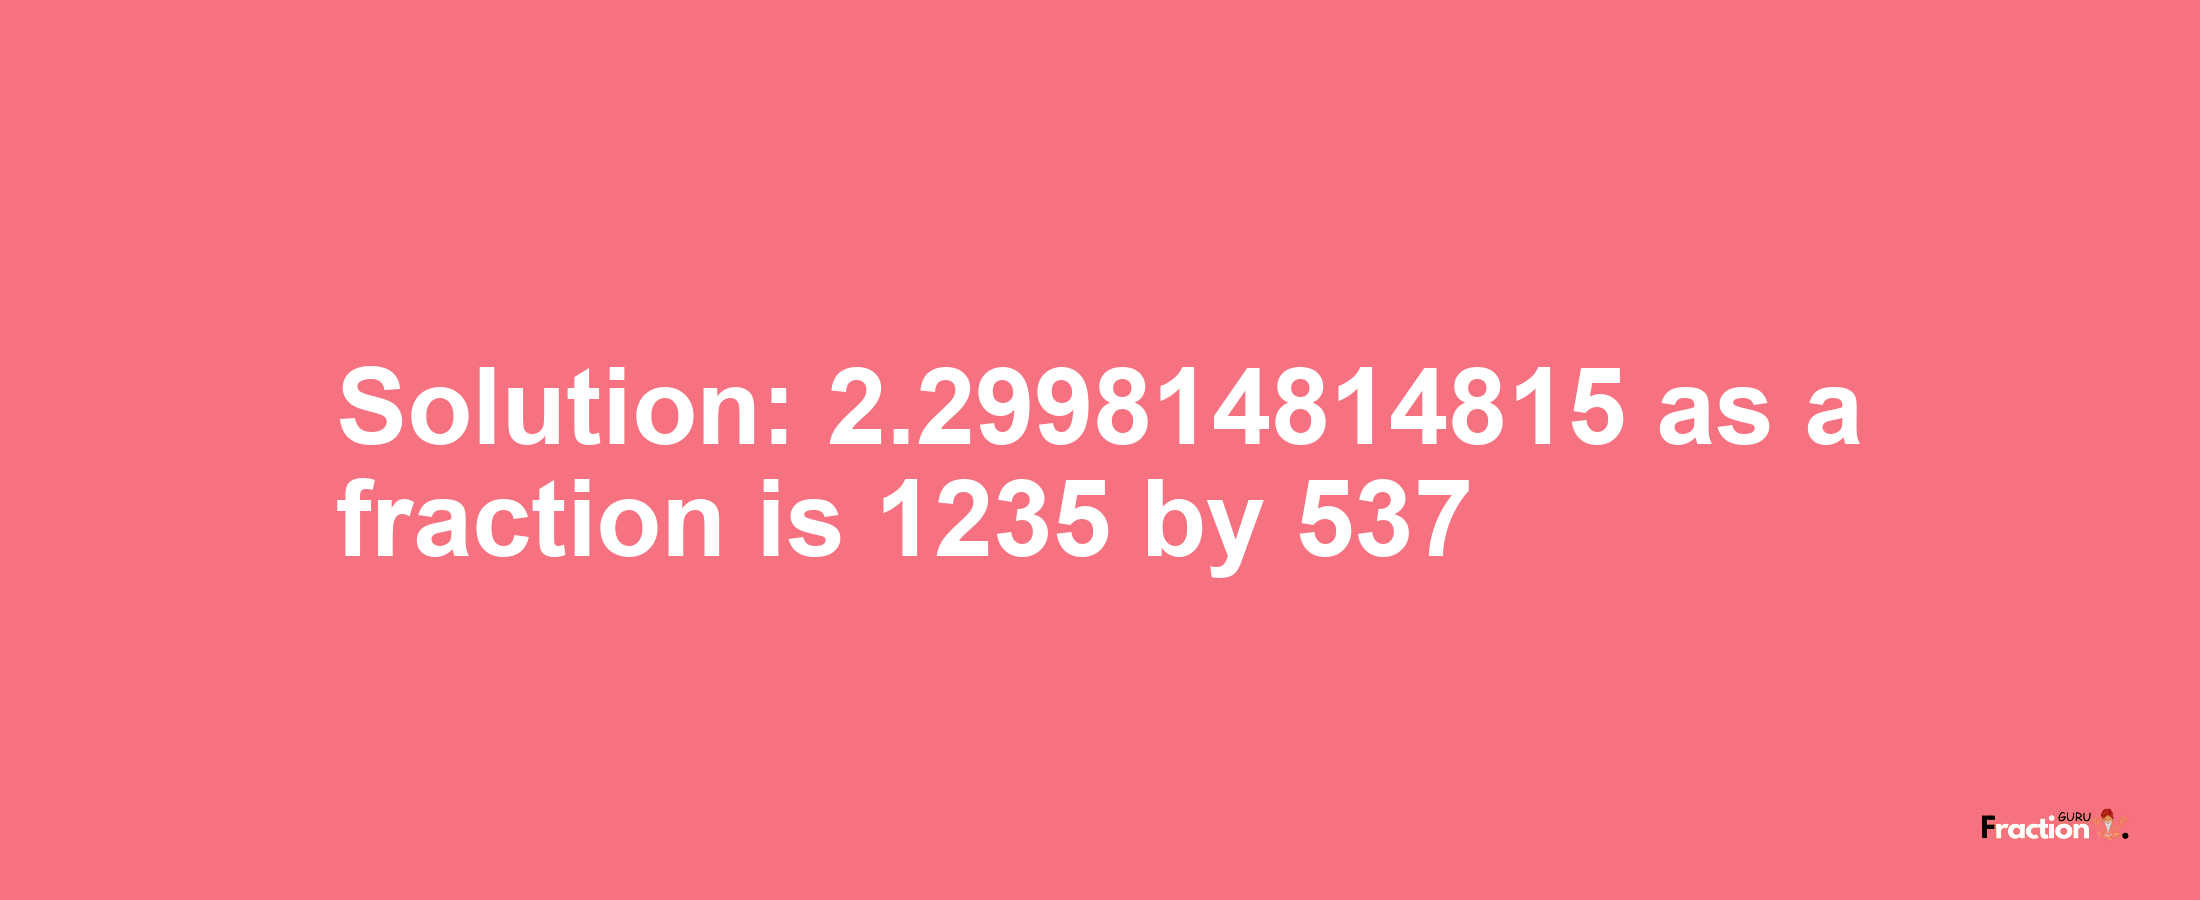 Solution:2.299814814815 as a fraction is 1235/537